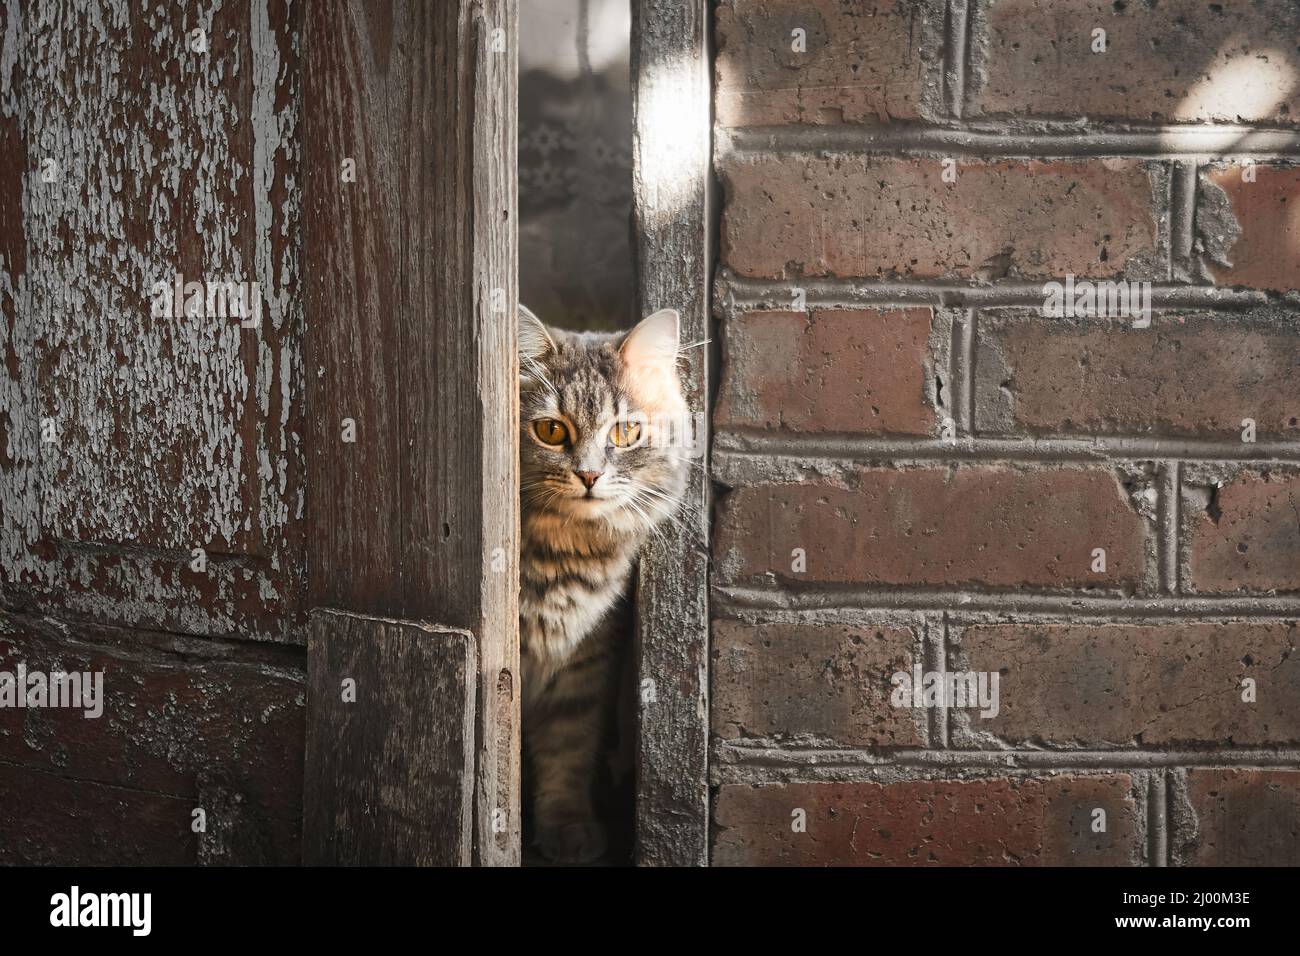 Fluffy gray cat peeks out from behind the door of an old house Stock Photo